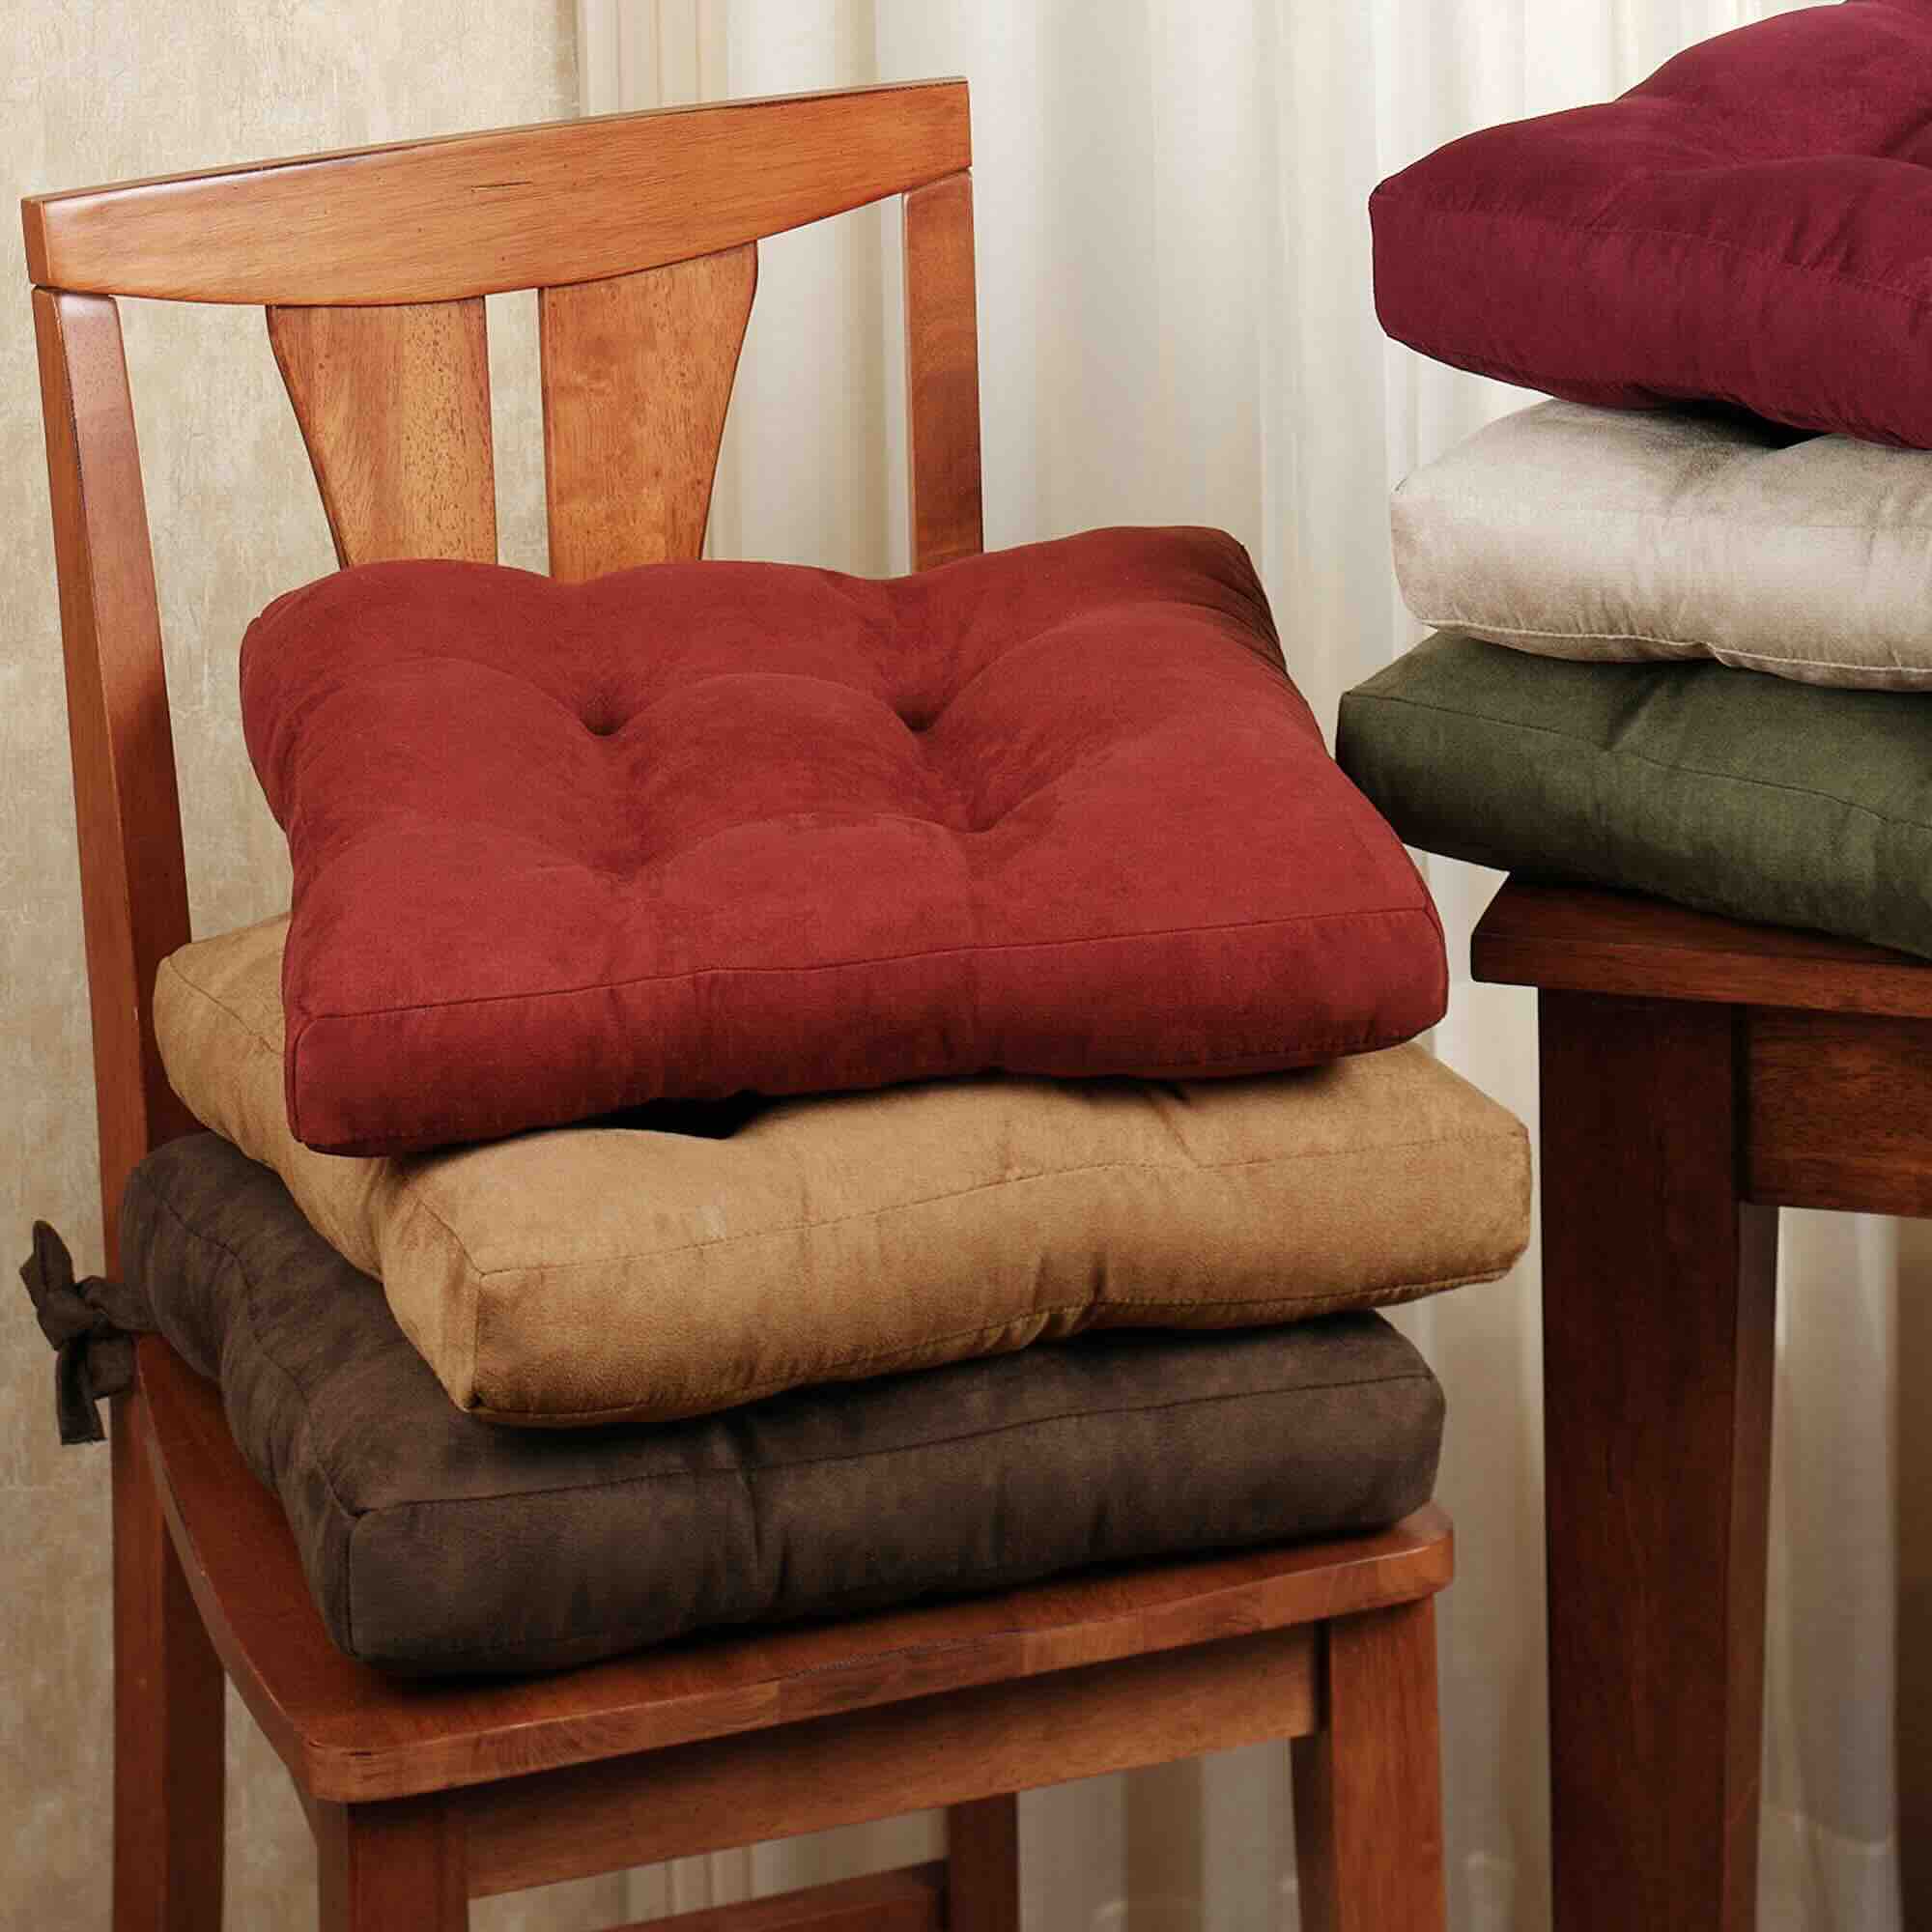 How To Make Dining Chair Cushions